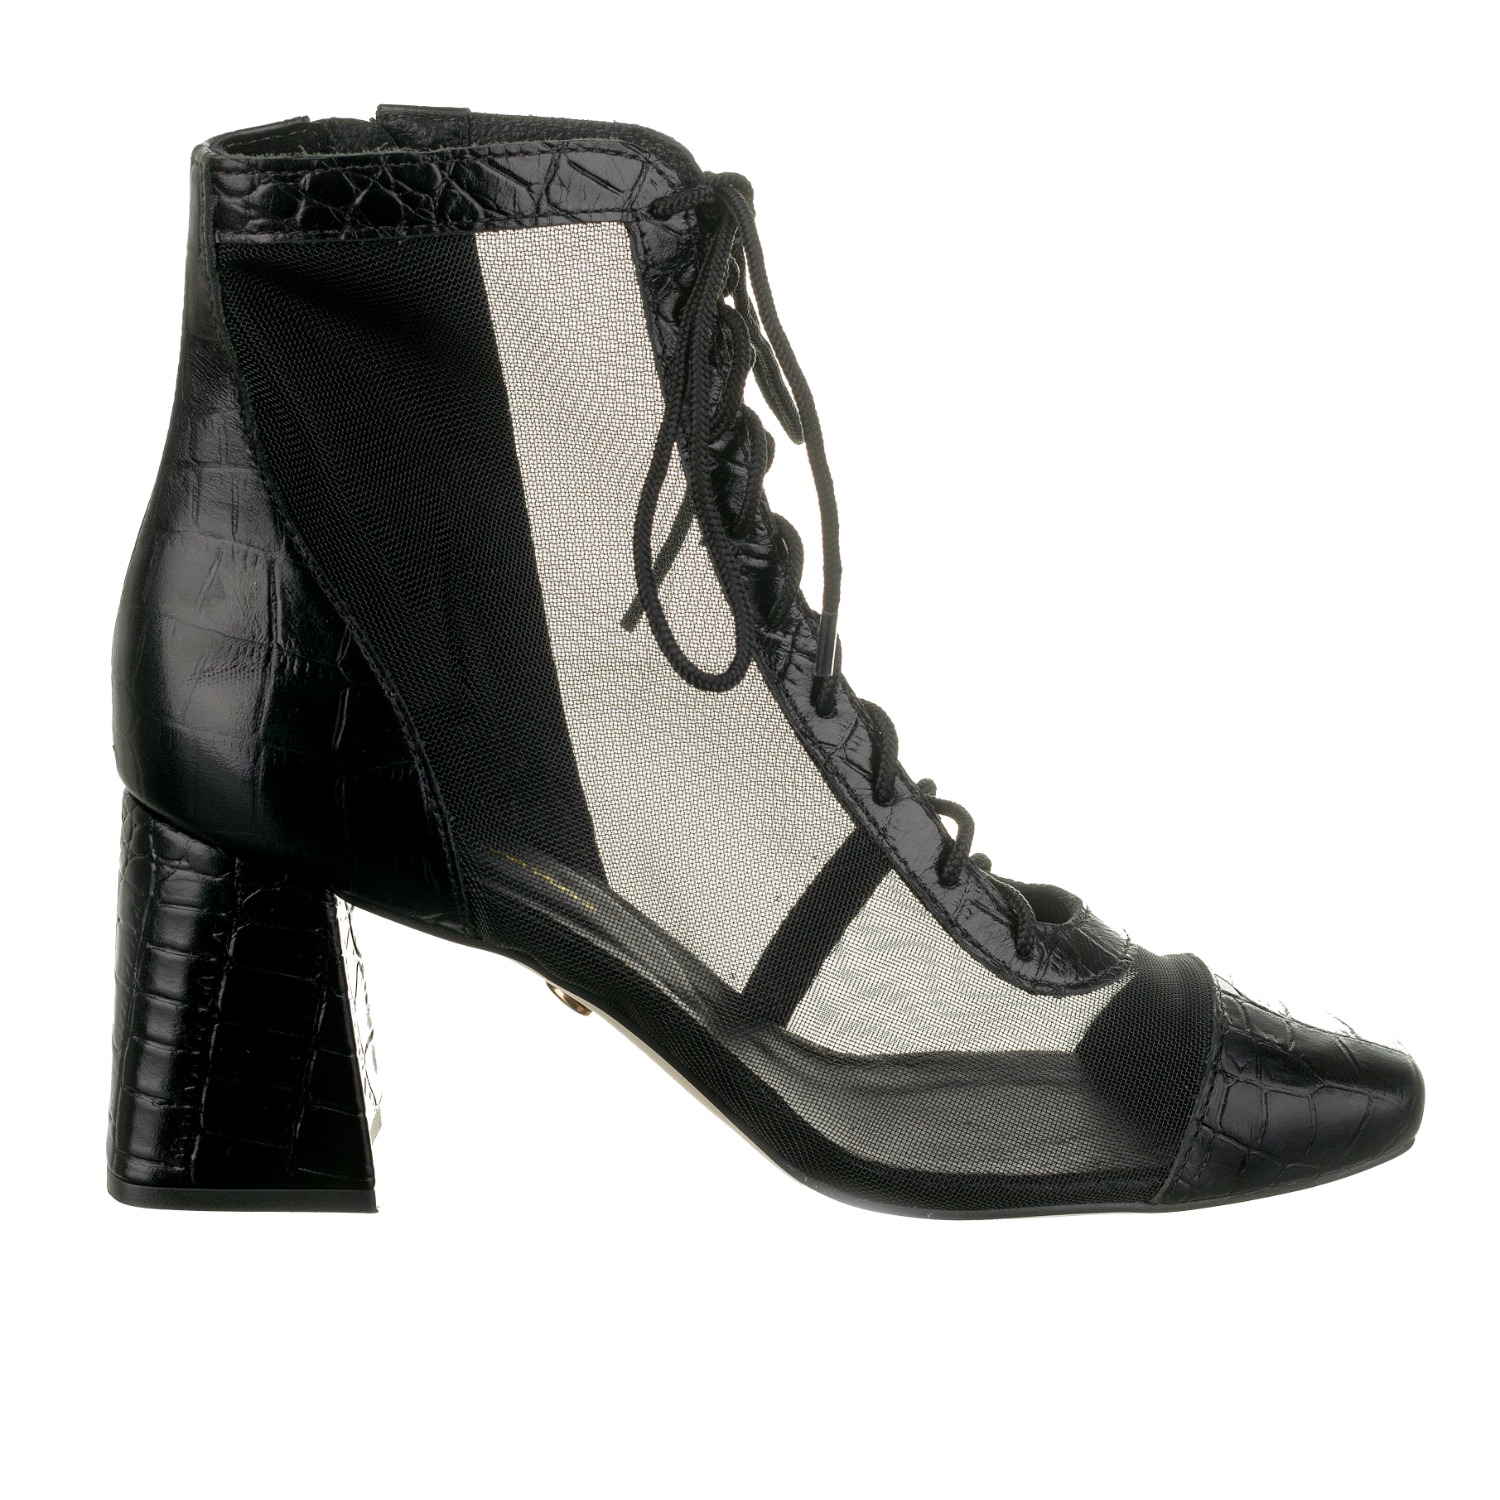 Women's Black Patent Leather Heeled Ankle Boots | 5 UK | MAS Laus